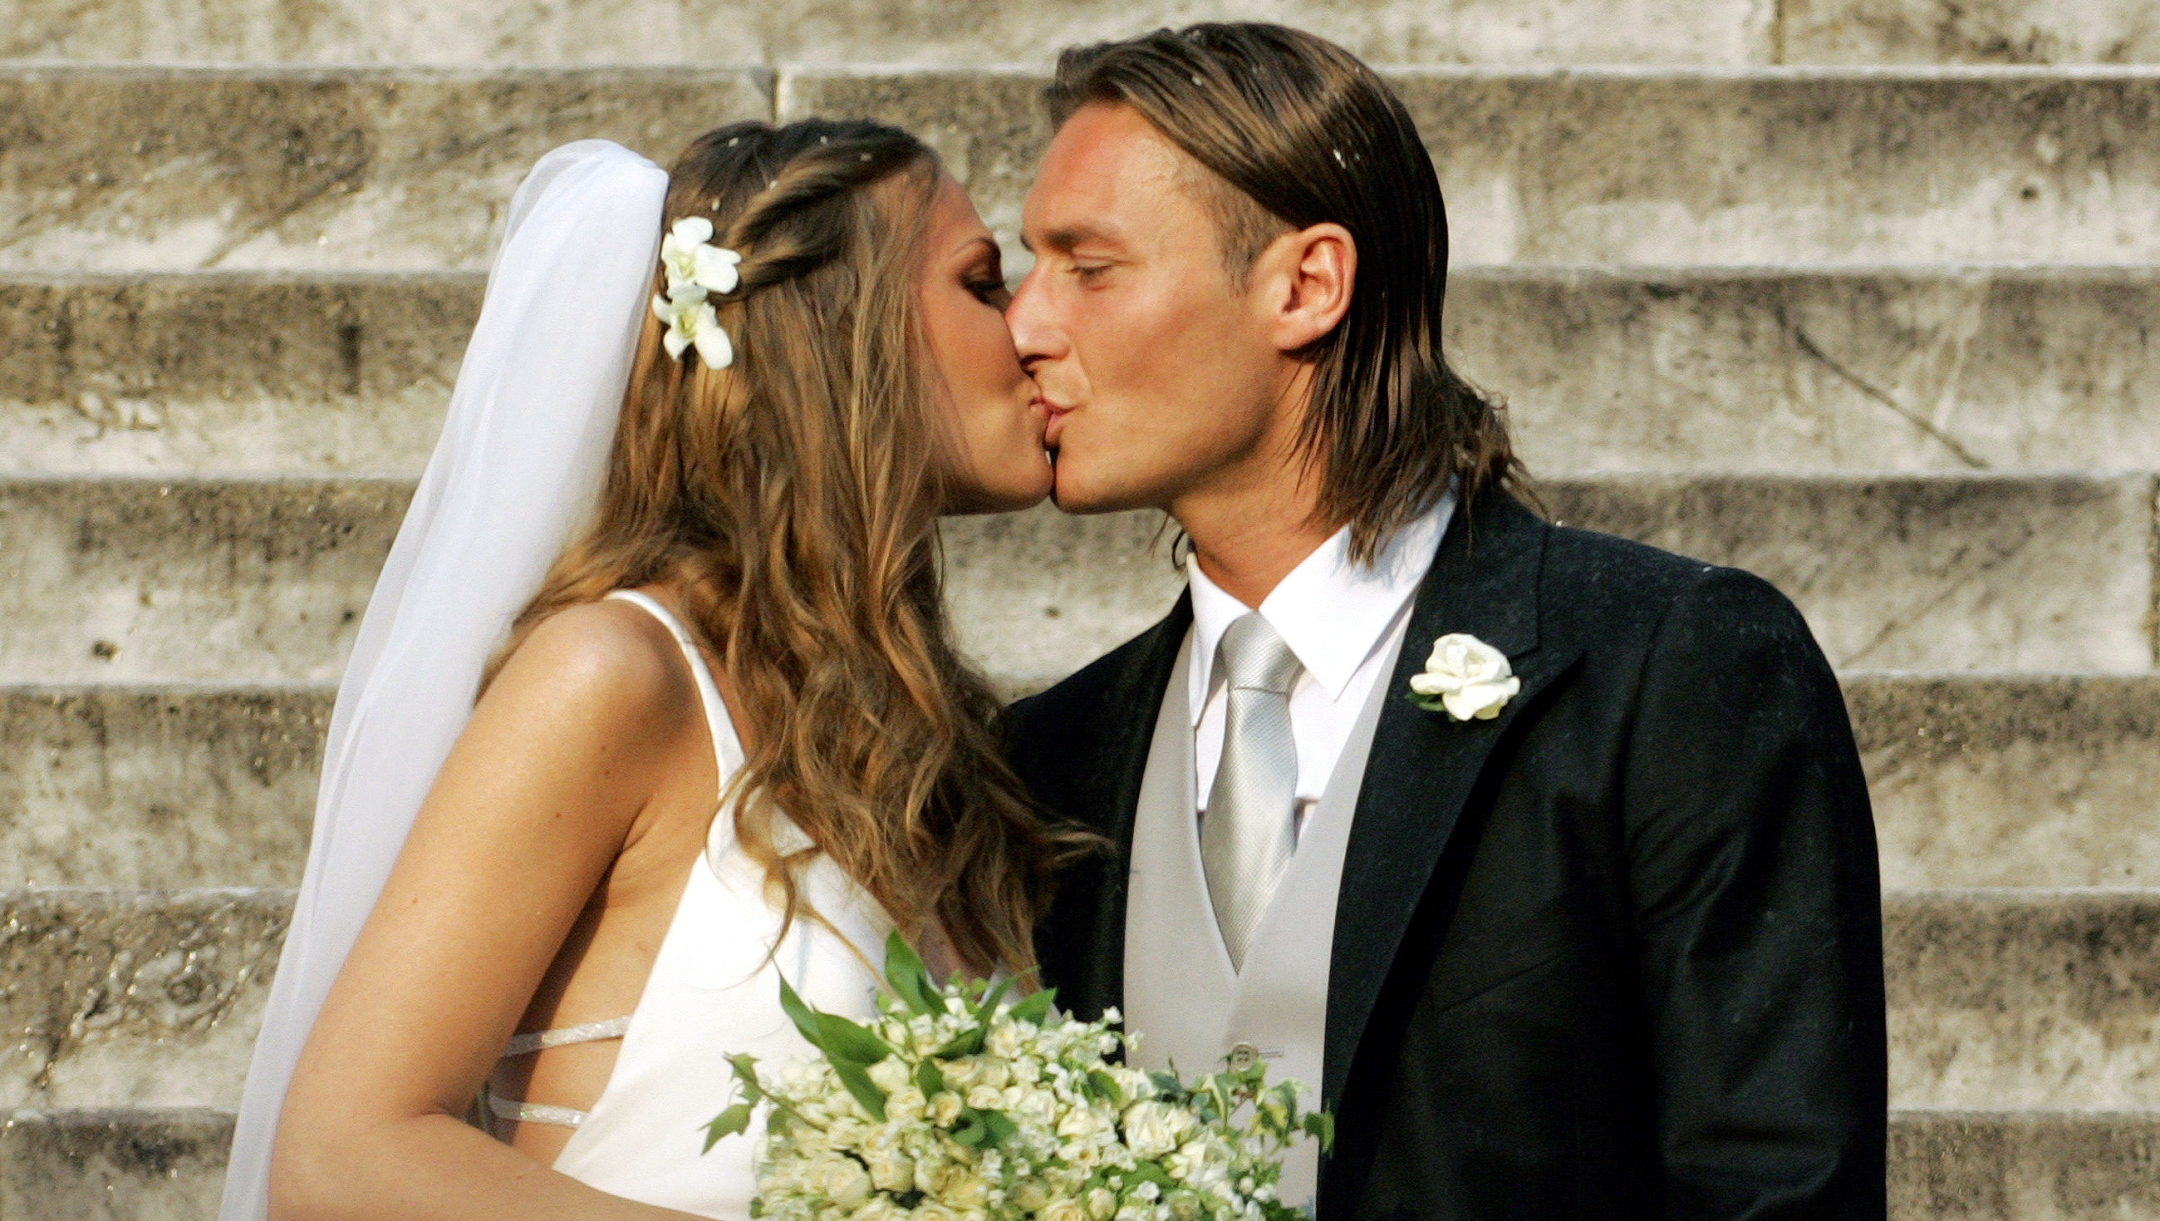 AS Roma captain Francesco Totti (R) kisses his wife Italian TV star Hilary Blasi after their wedding 19 June 2005 in Rome.  AFP PHOTO/Andreas SOLARO (Photo by ANDREAS SOLARO / AFP)